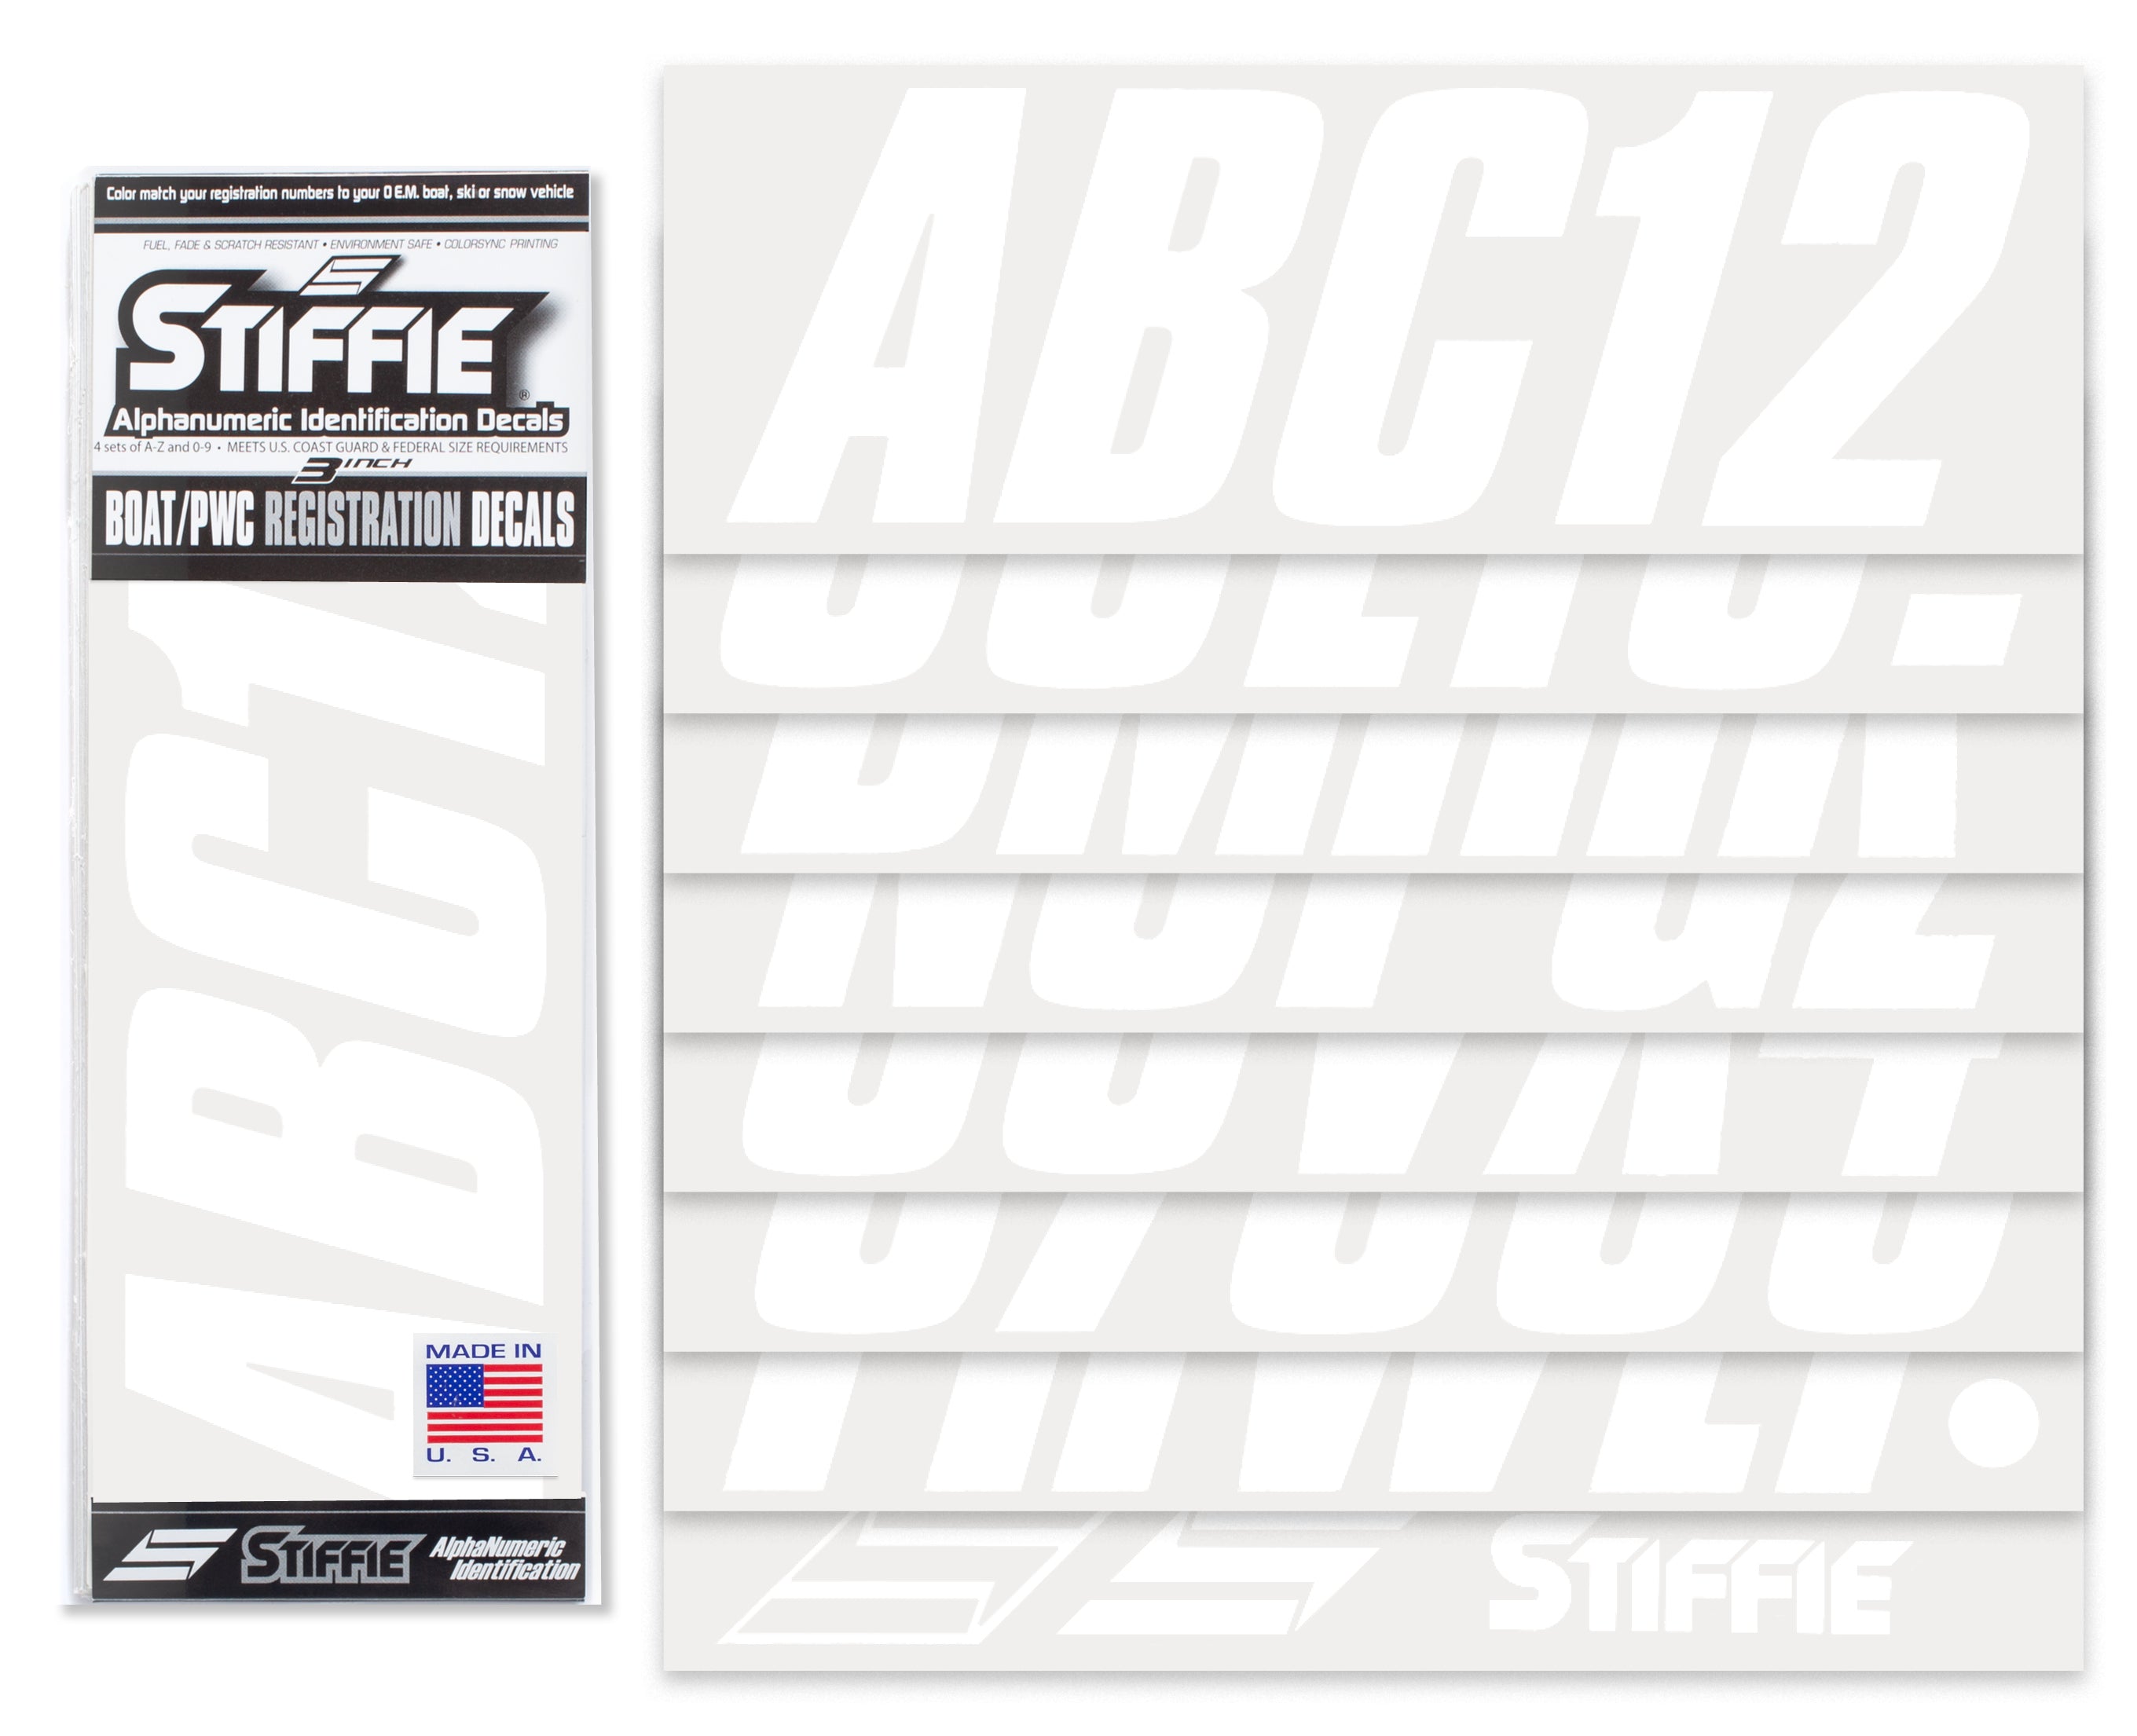 STIFFIE Shift White 3" ID Kit Alpha-Numeric Registration Identification Numbers Stickers Decals for Boats & Personal Watercraft